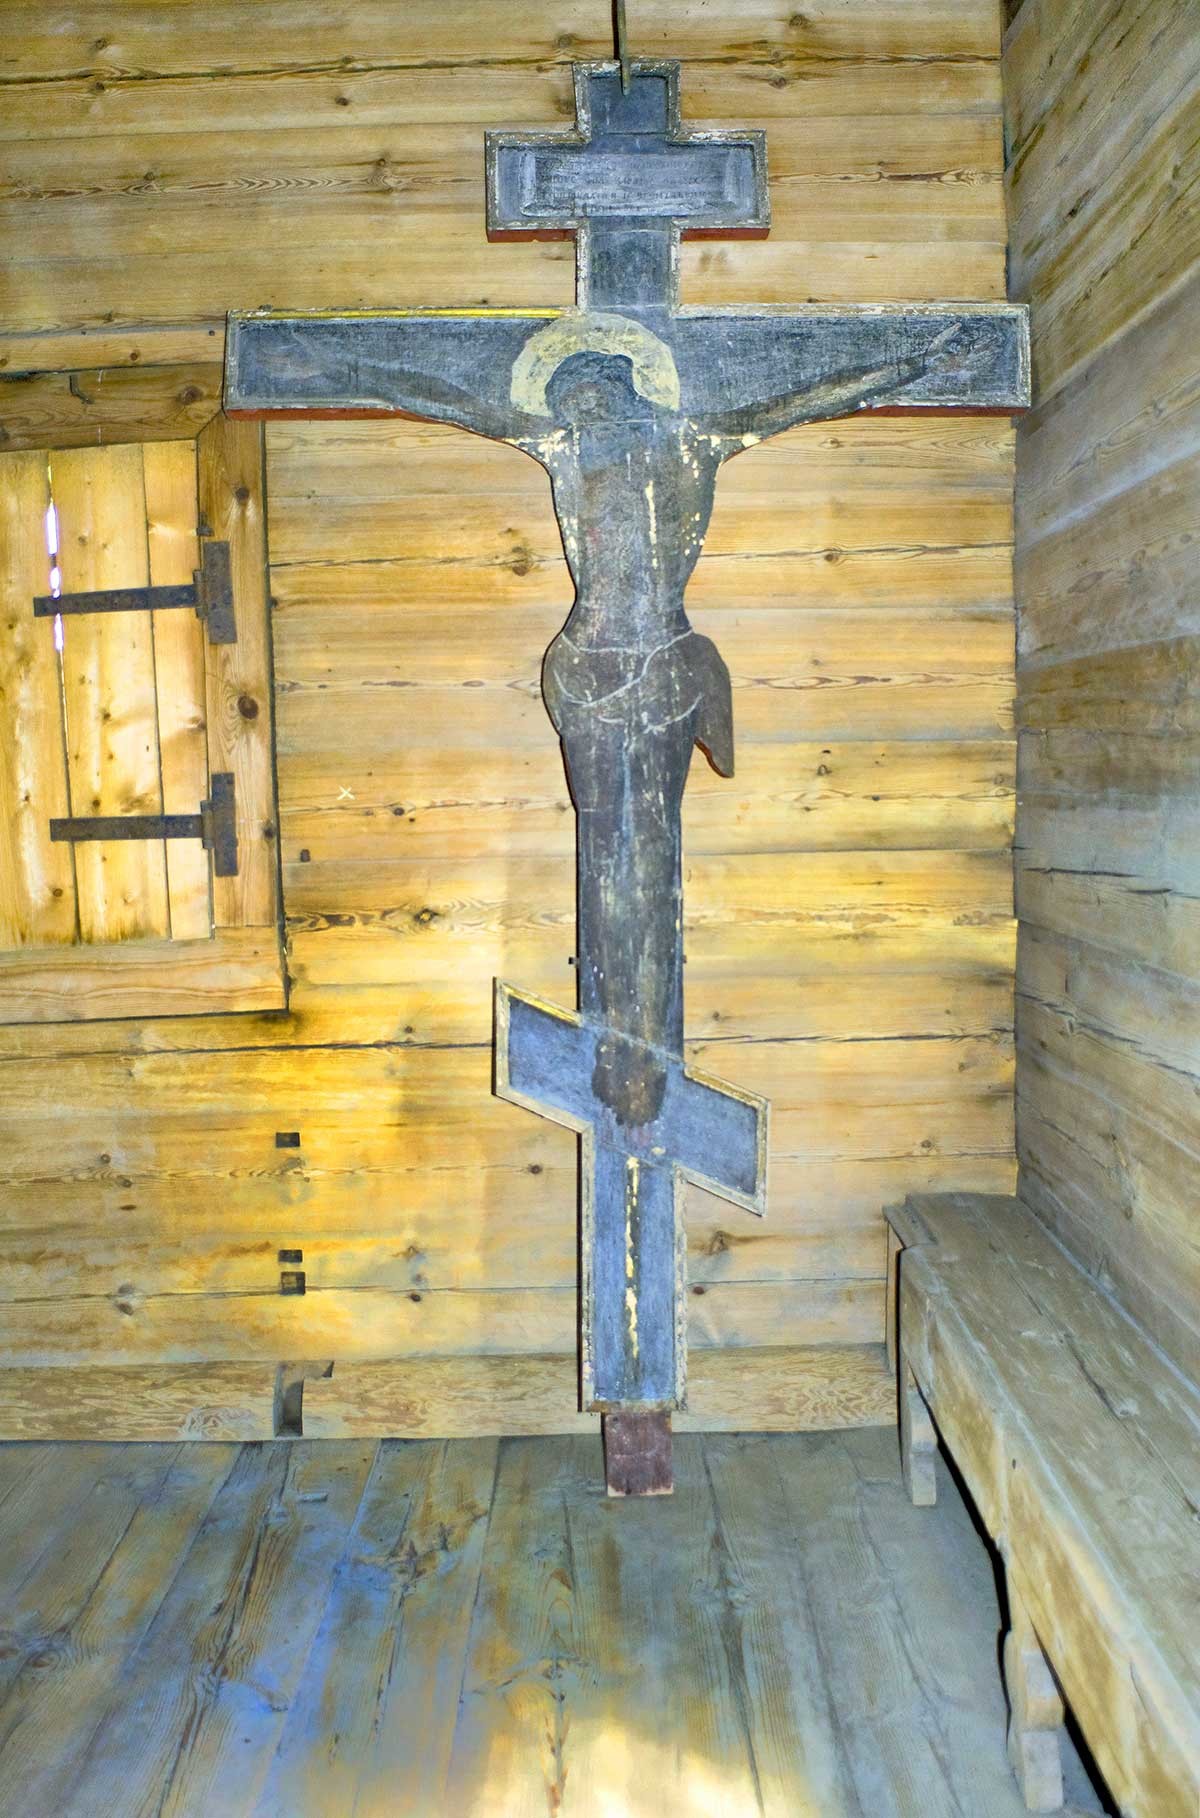 Church of St. John the Divine on the Ishnya. Interior, apse (altar space) with wooden crucifix visible in Prokudin-Gorsky's photograph. July 8, 2019